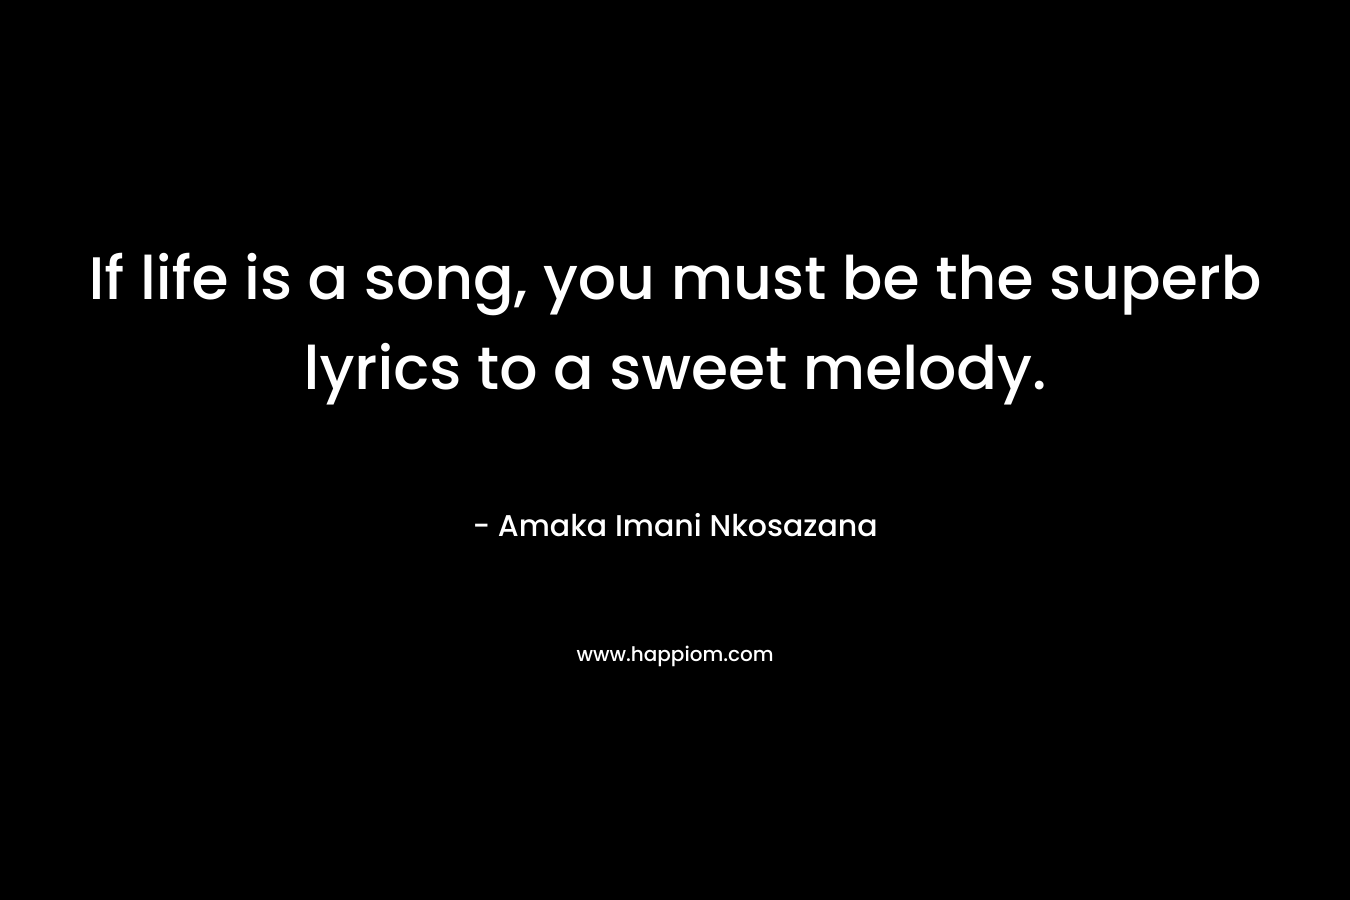 If life is a song, you must be the superb lyrics to a sweet melody. – Amaka Imani Nkosazana